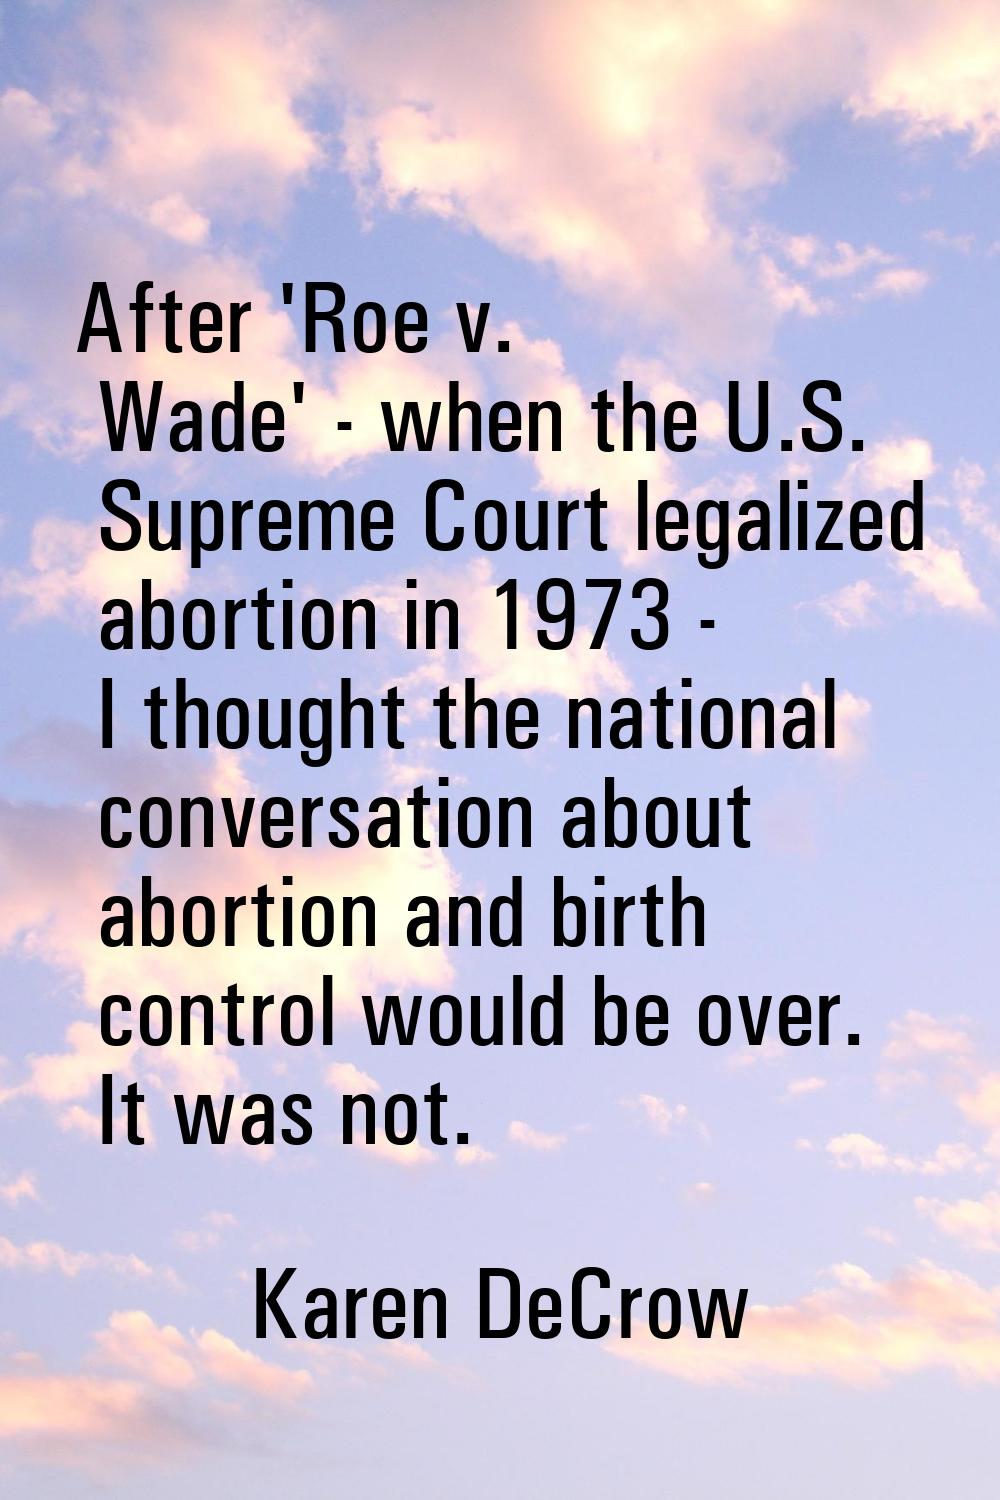 After 'Roe v. Wade' - when the U.S. Supreme Court legalized abortion in 1973 - I thought the nation